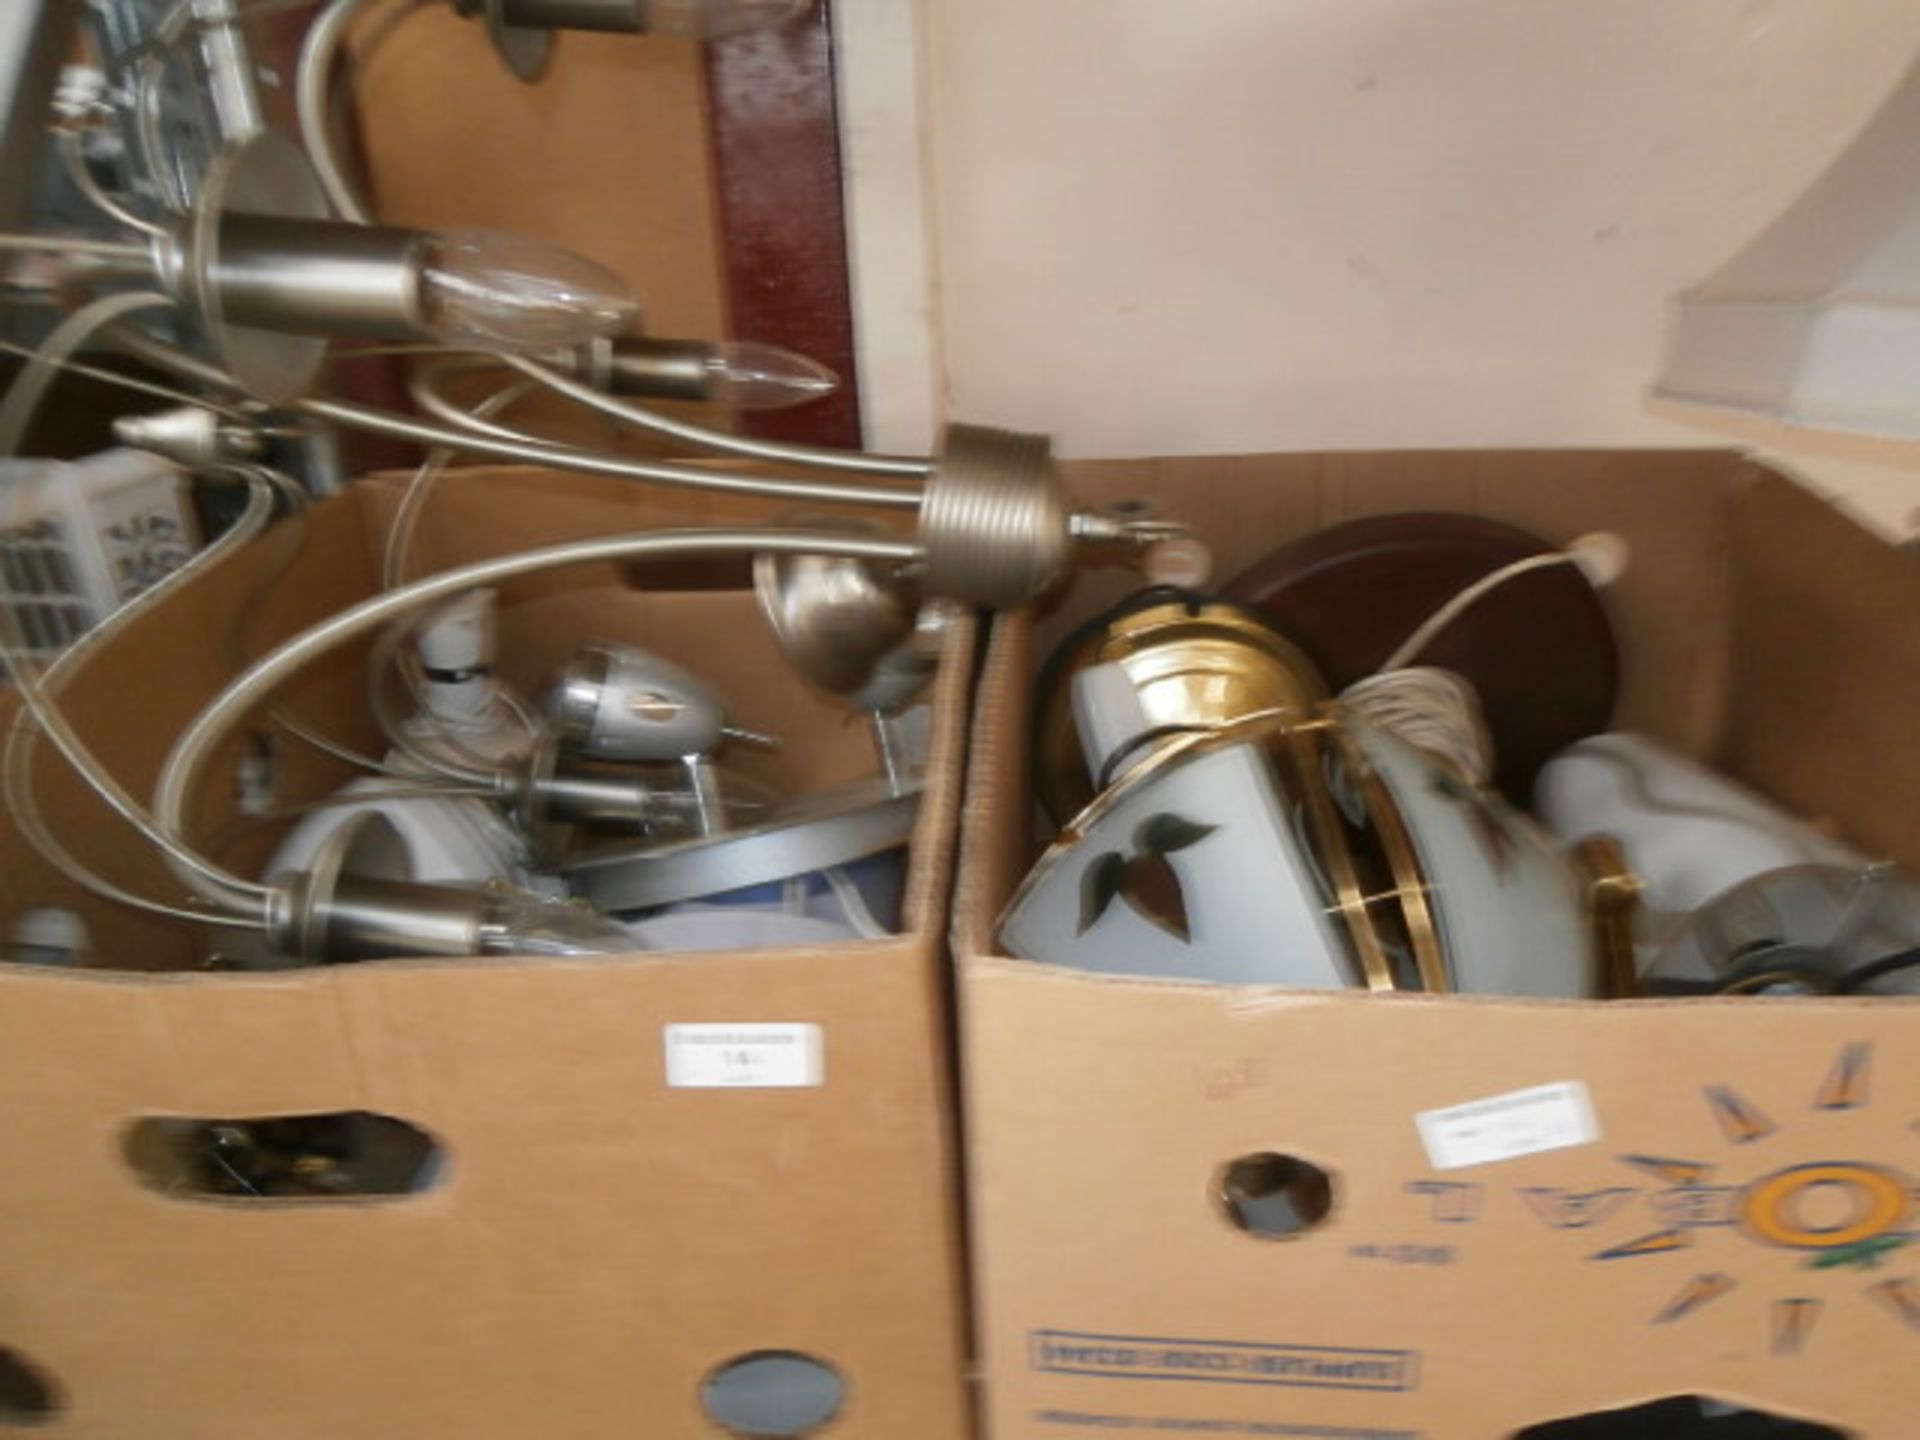 2 boxes of lamps & light fittings